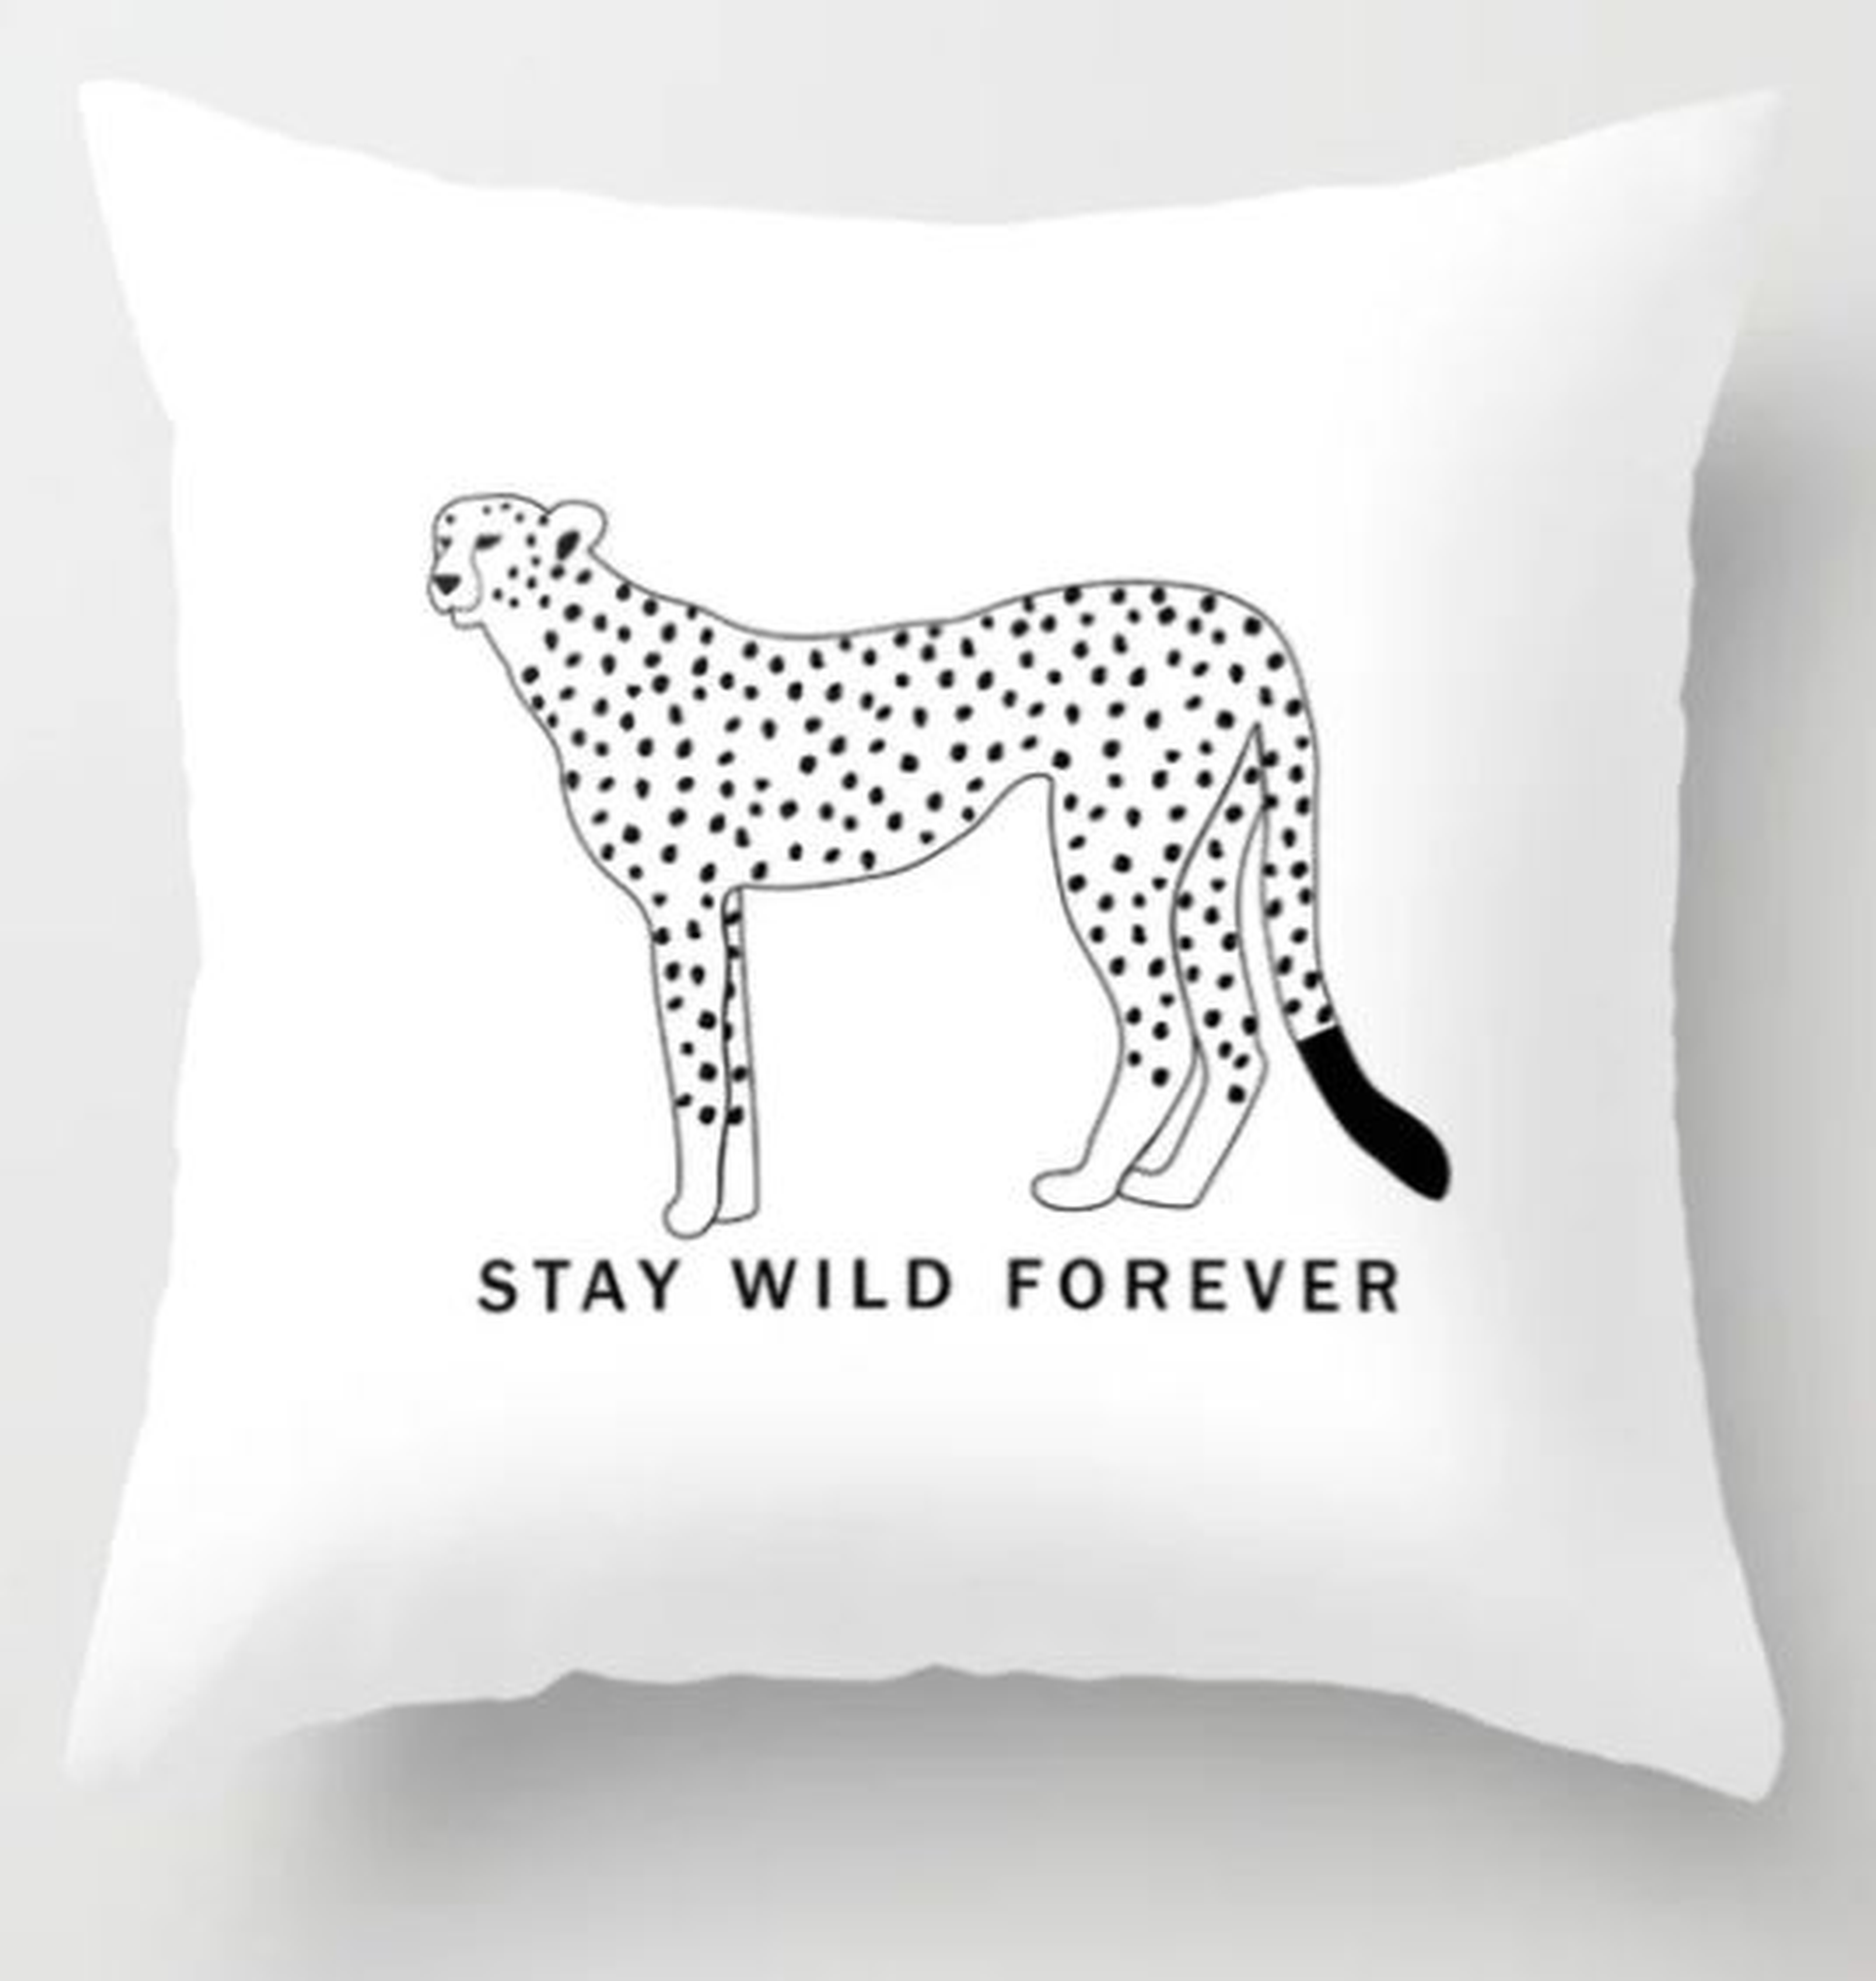 Stay wild forever - black leopard Throw Pillow 16"x16" - Society6